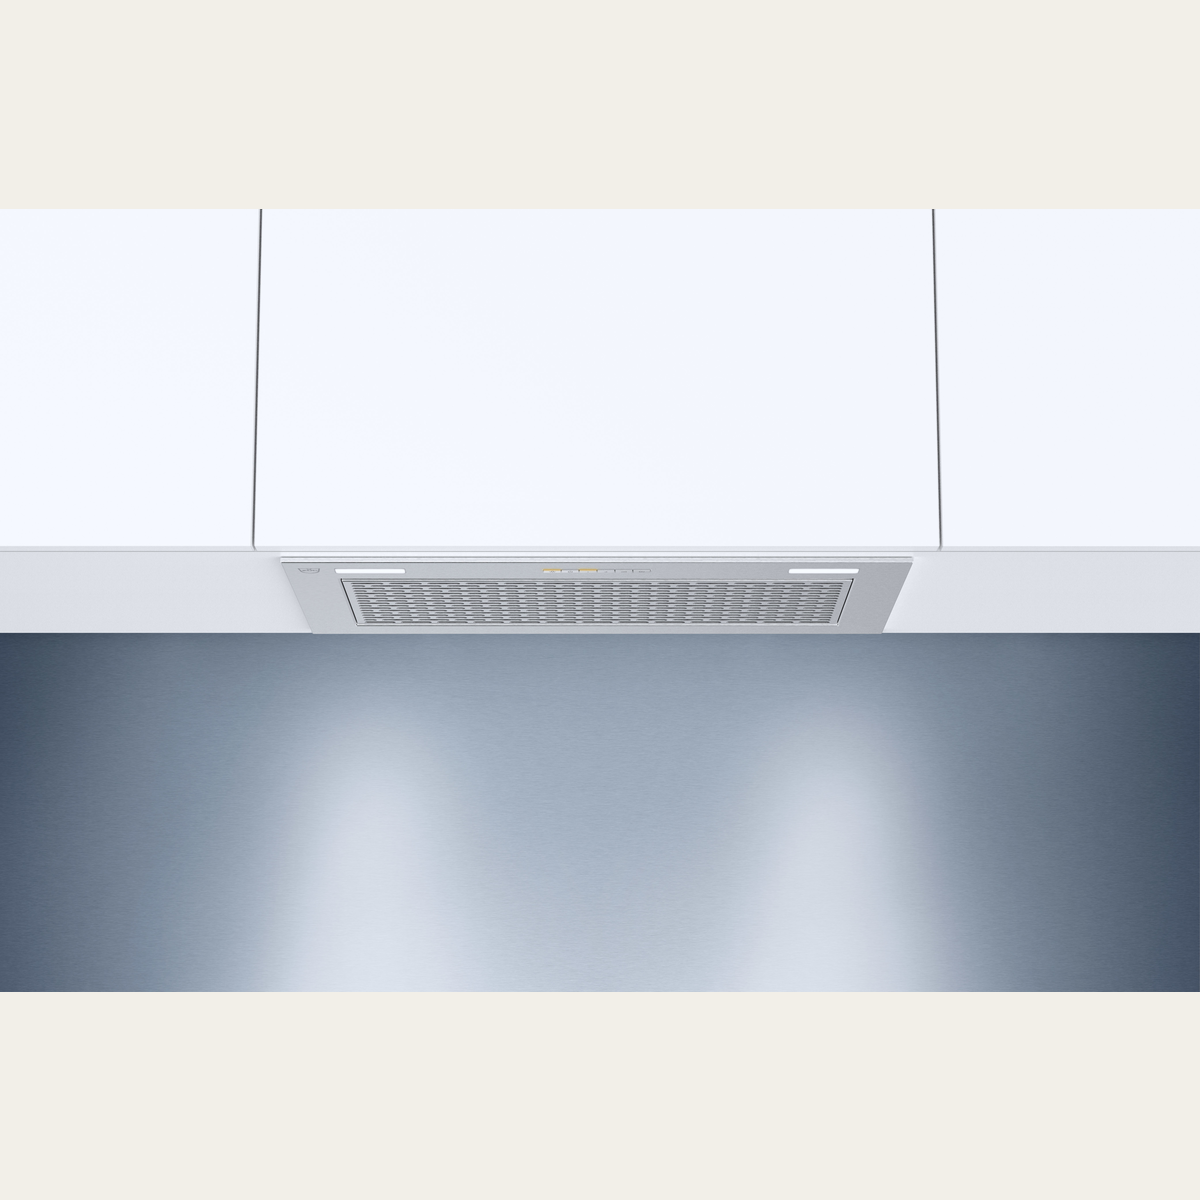 V-ZUG Range hood AiroClearCabinet V4000, Standard width: 60.0 cm, ChromeClass, OptiLink, Energy efficiency rating: A, Extracted air, push buttons, Installation method: integrated range hood